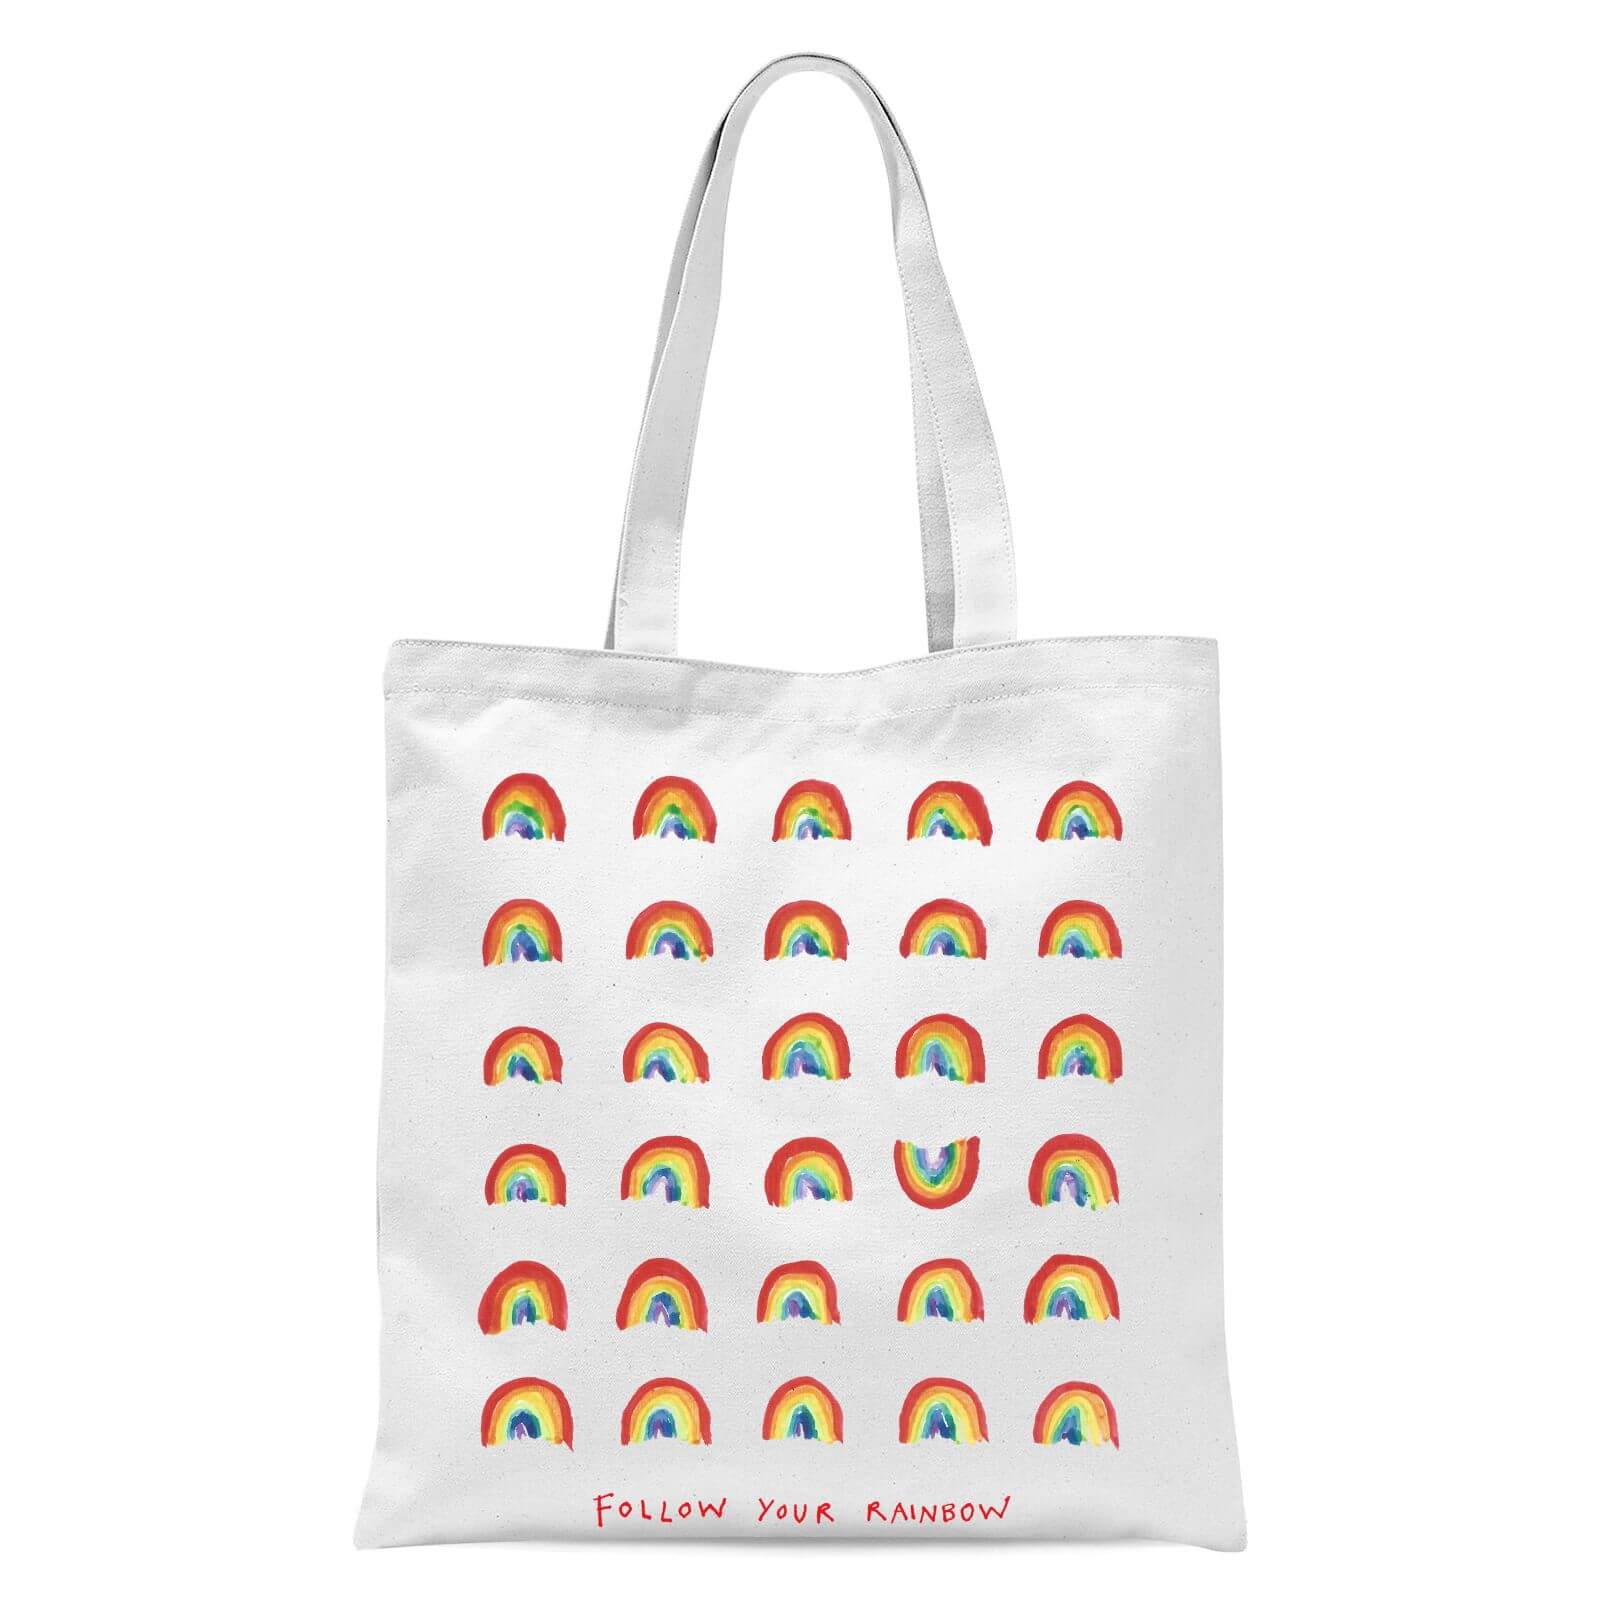 Poet and Painter Follow Your Rainbow Tote Bag - White